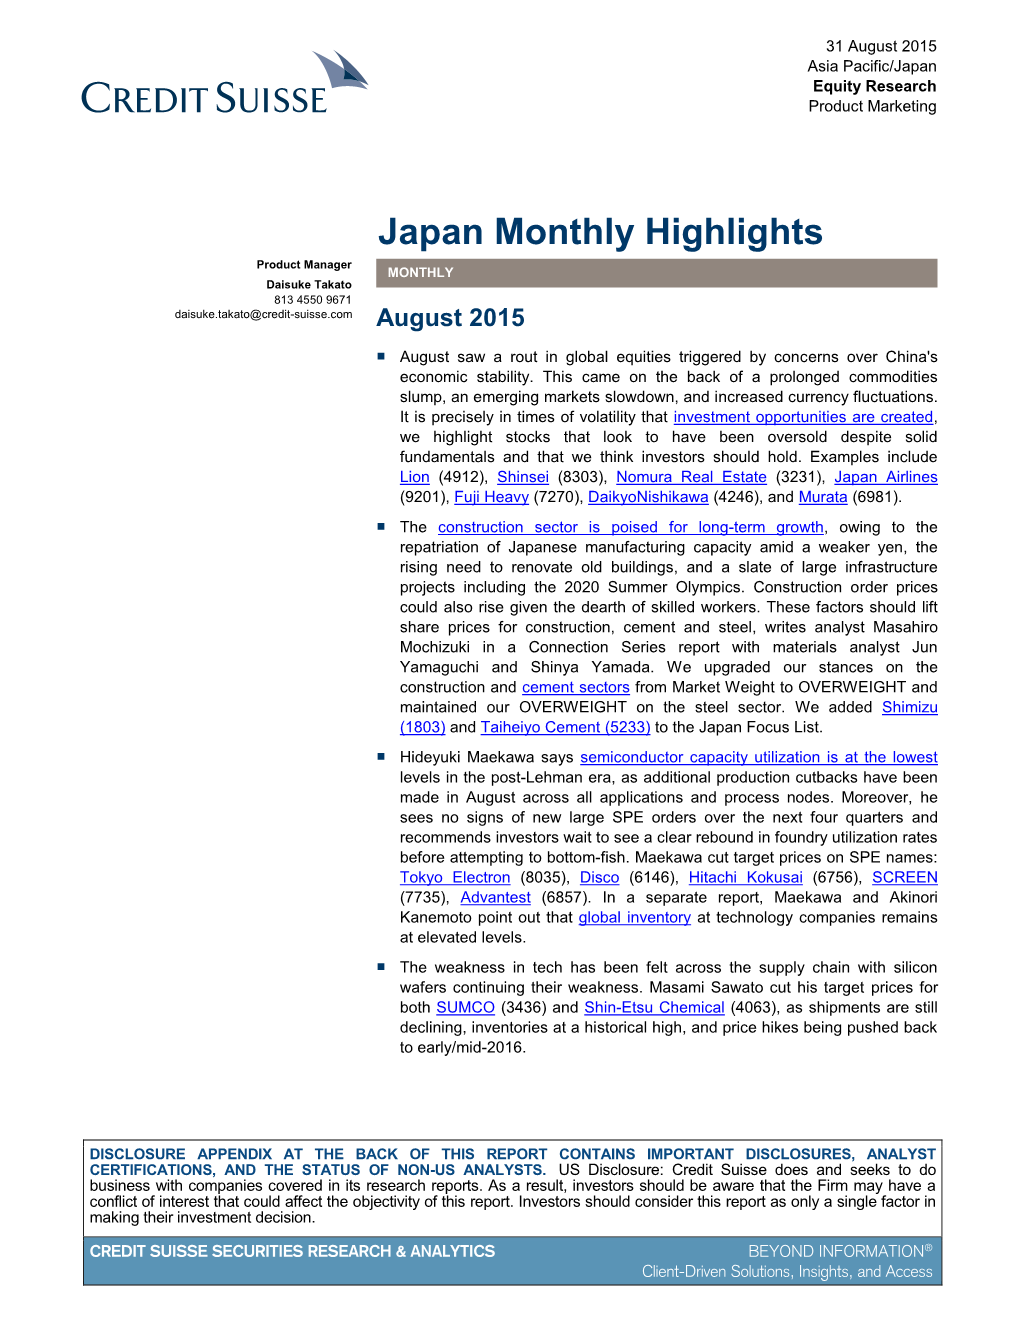 Japan Monthly Highlights Product Manager MONTHLY